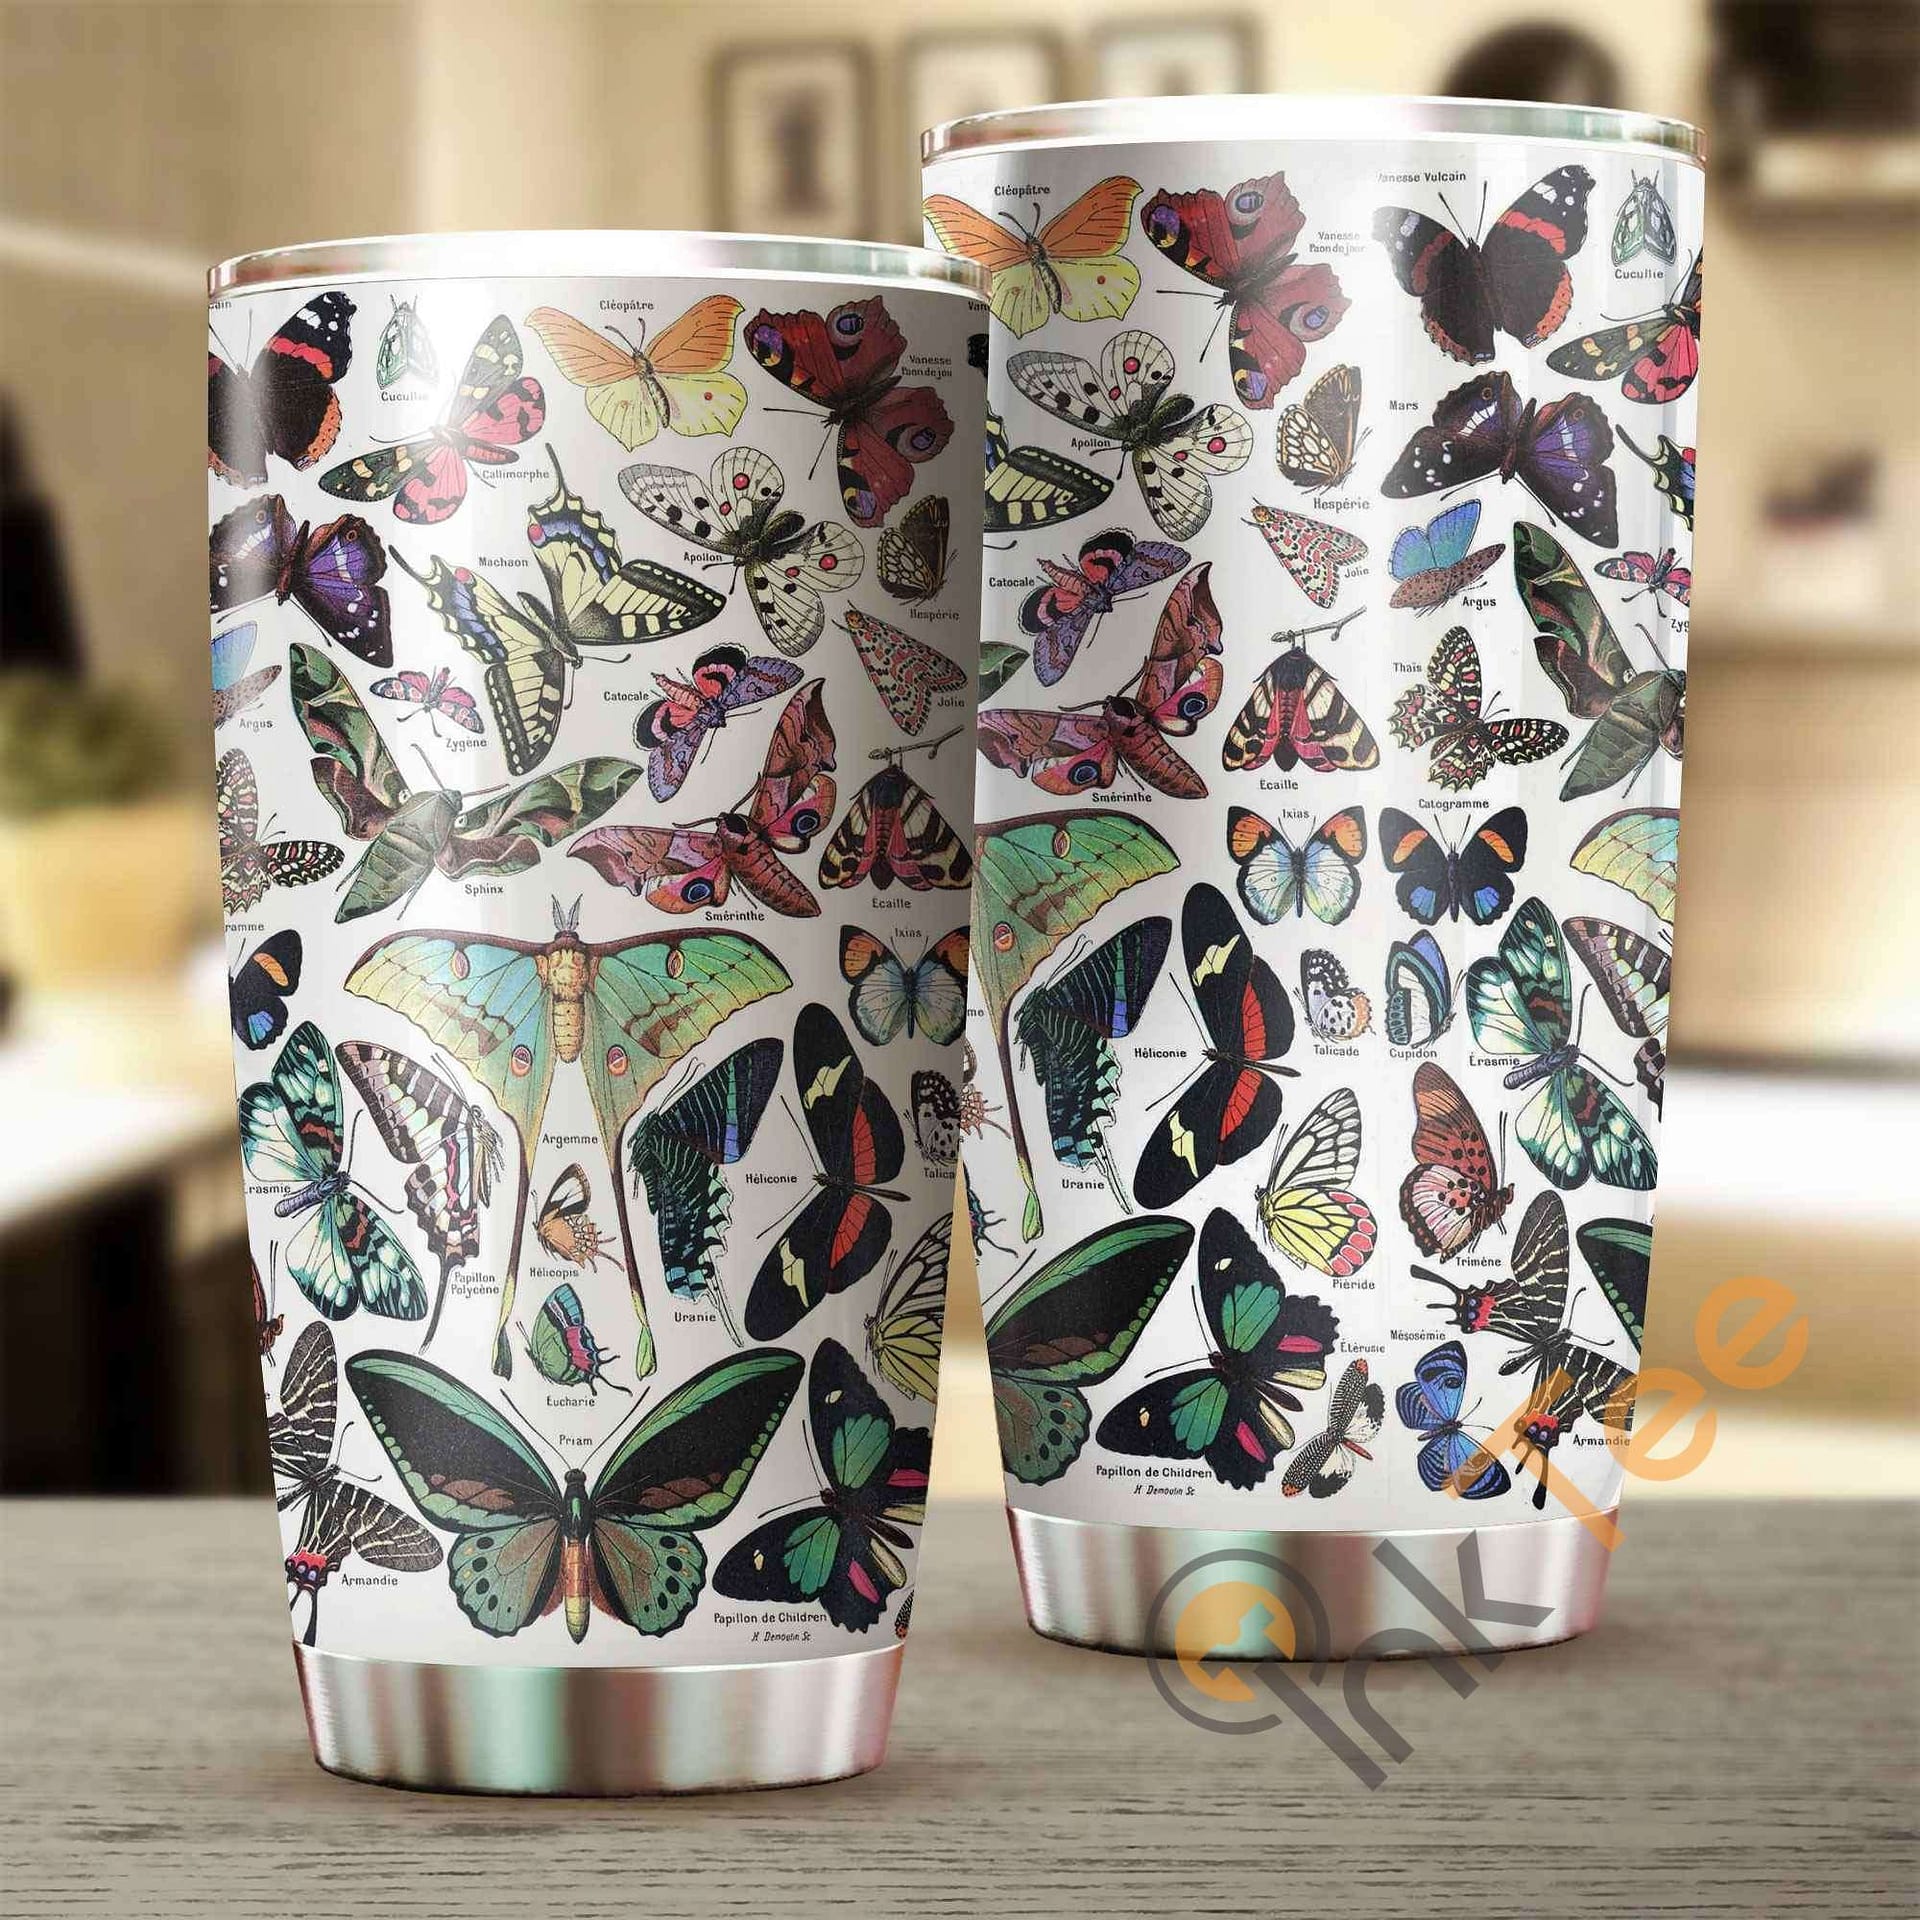 Amazing Butterfly Collection Art Amazon Best Seller Sku 2593 Stainless Steel Tumbler